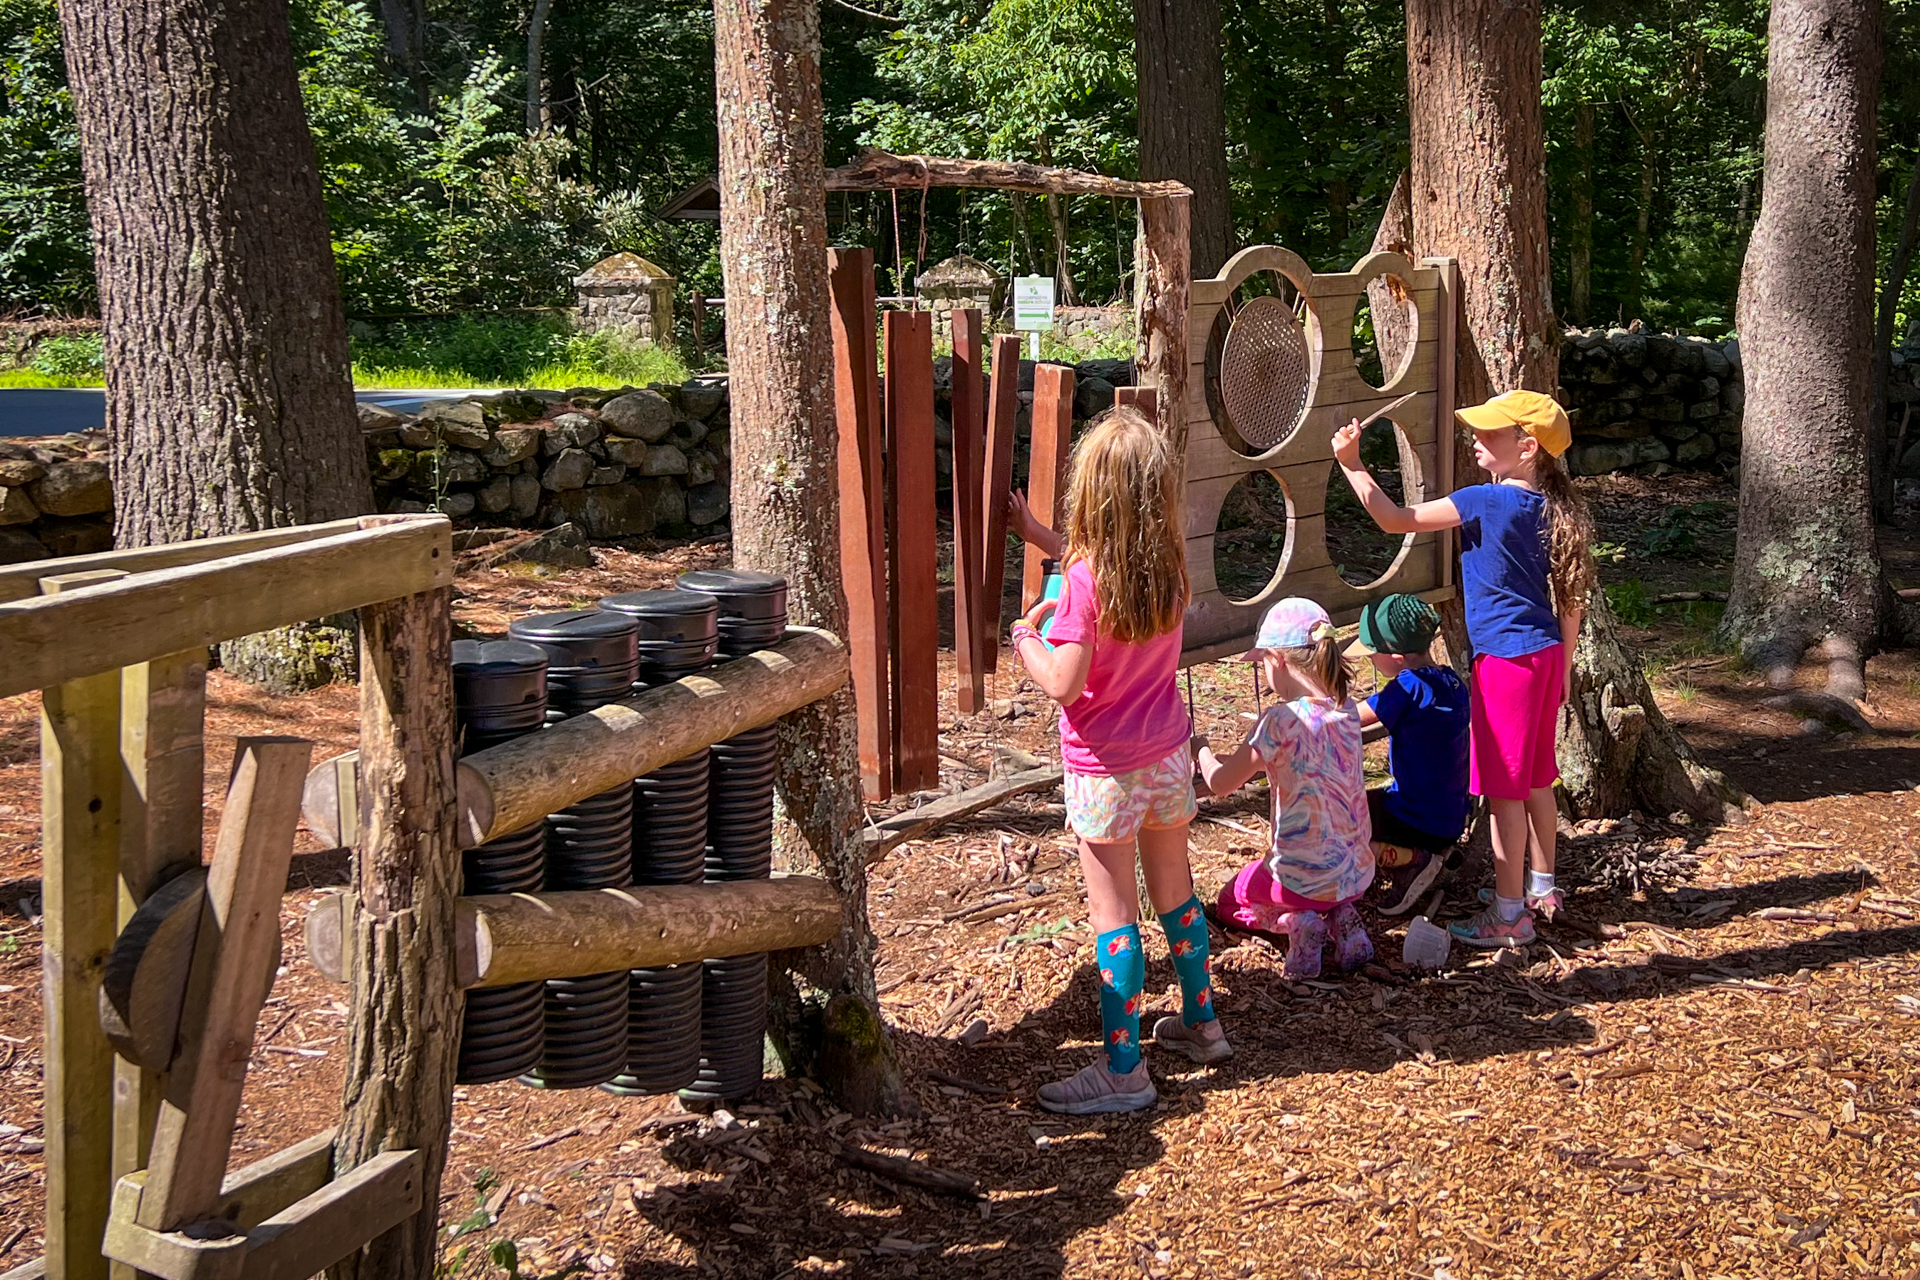 A group of campers plays the outdoor musical instruments in Moose Hill's Nature Play Area